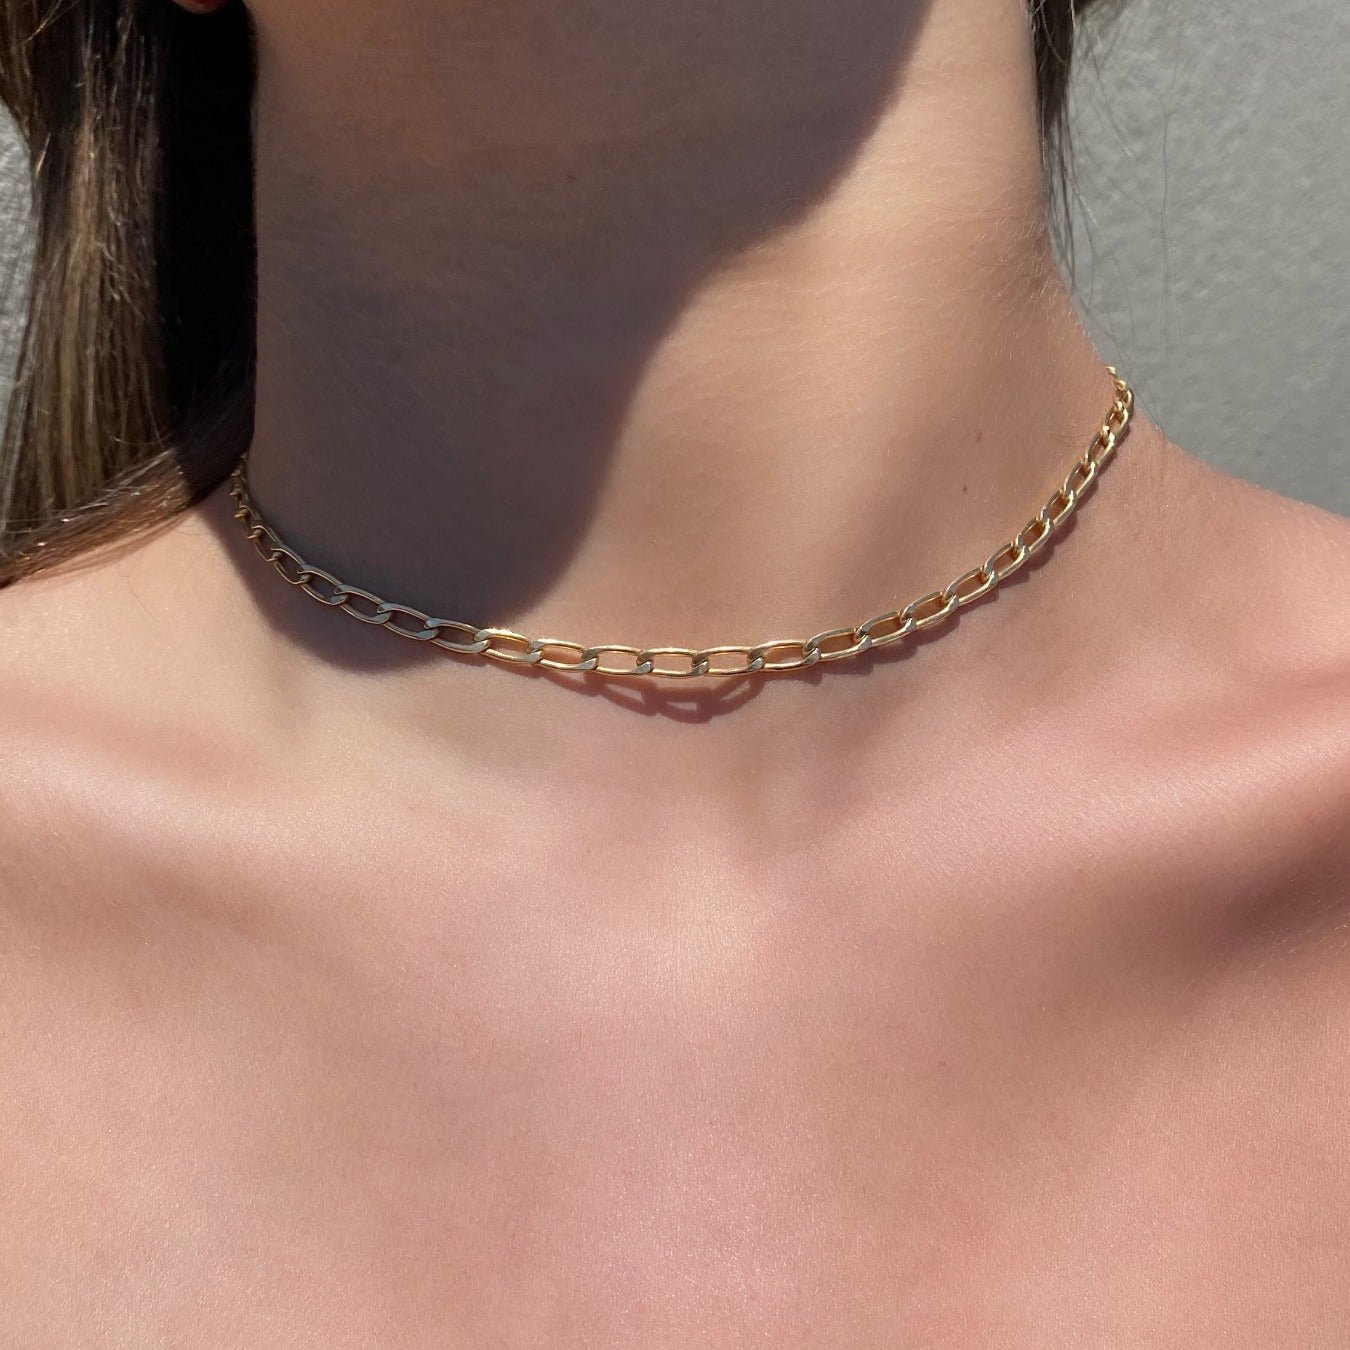 Gold Filled - Medium Elongated Curb Chain Necklace - Camille Jewelry